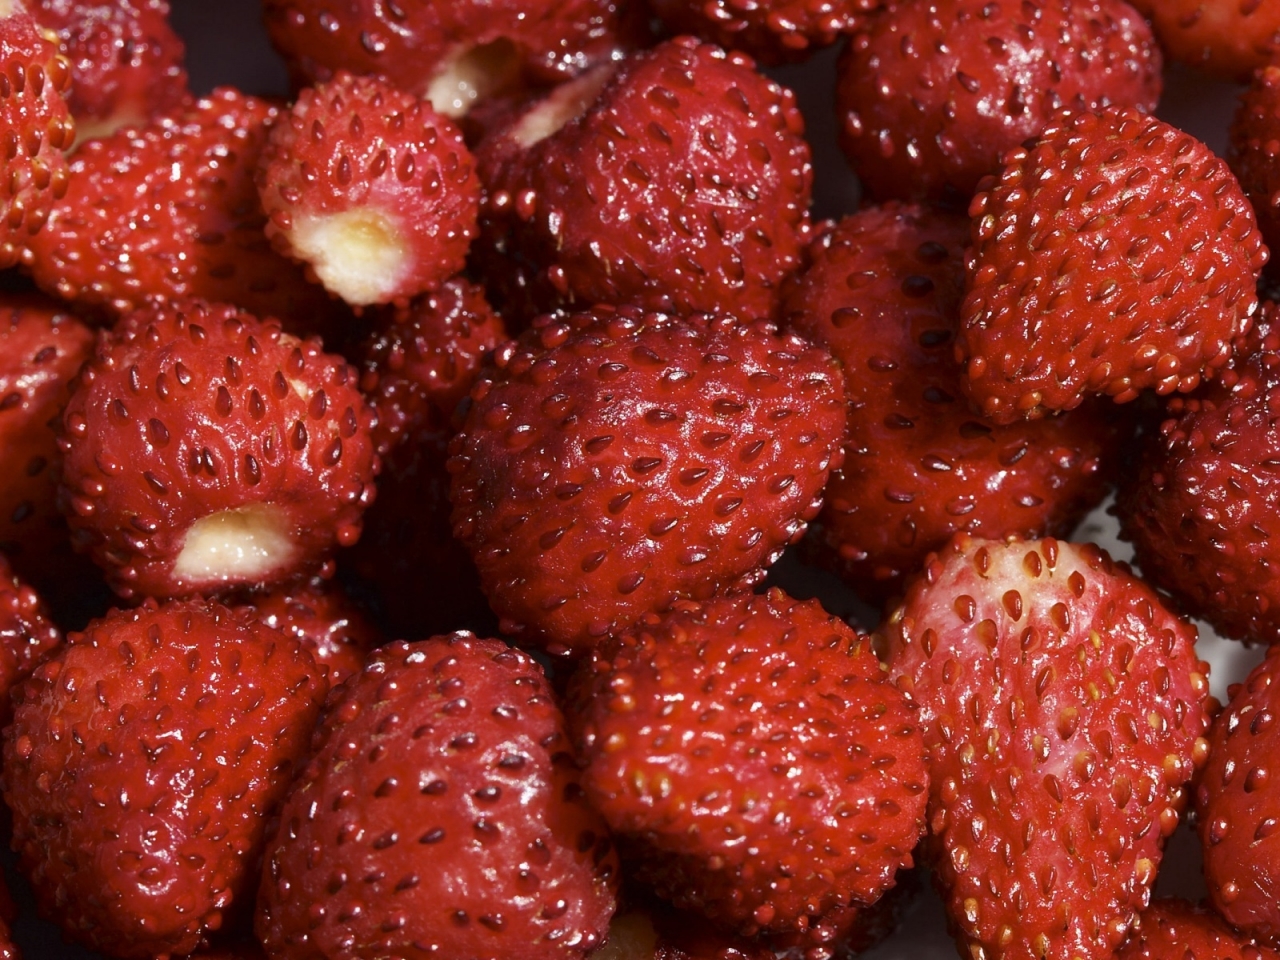 Strawberries for 1280 x 960 resolution